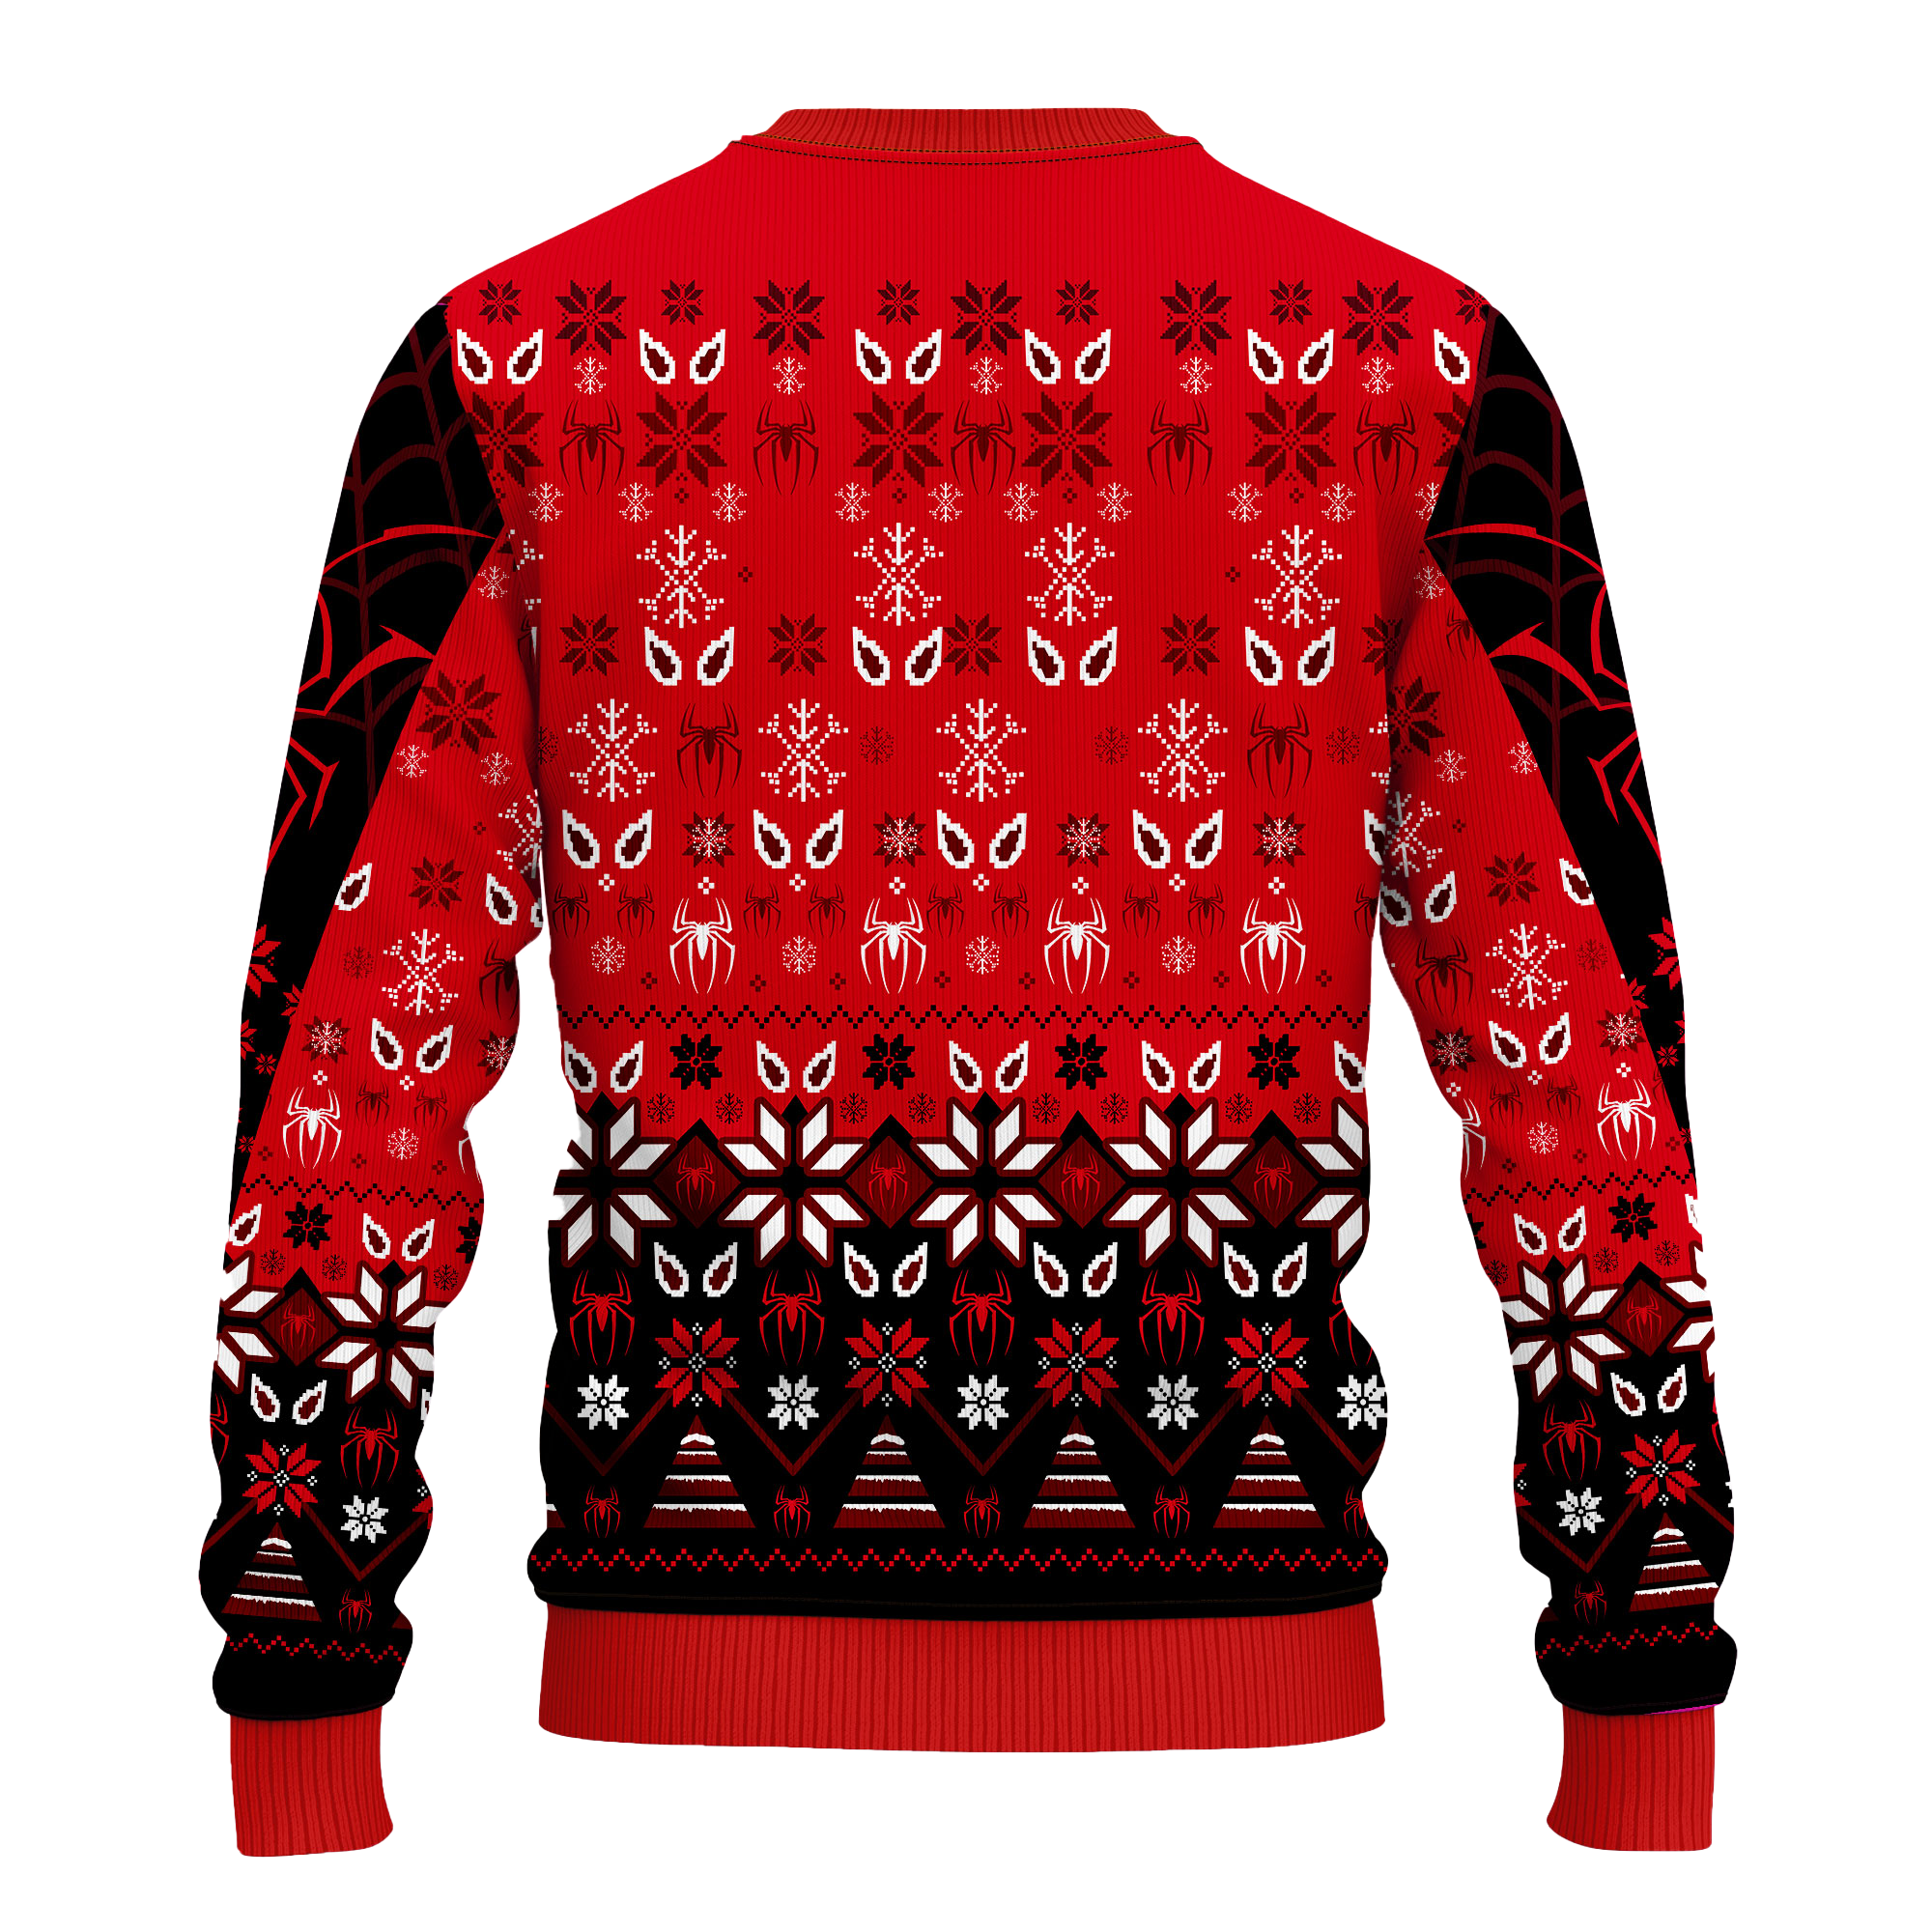 Spider Man Ugly Christmas Sweater Xmas Gift